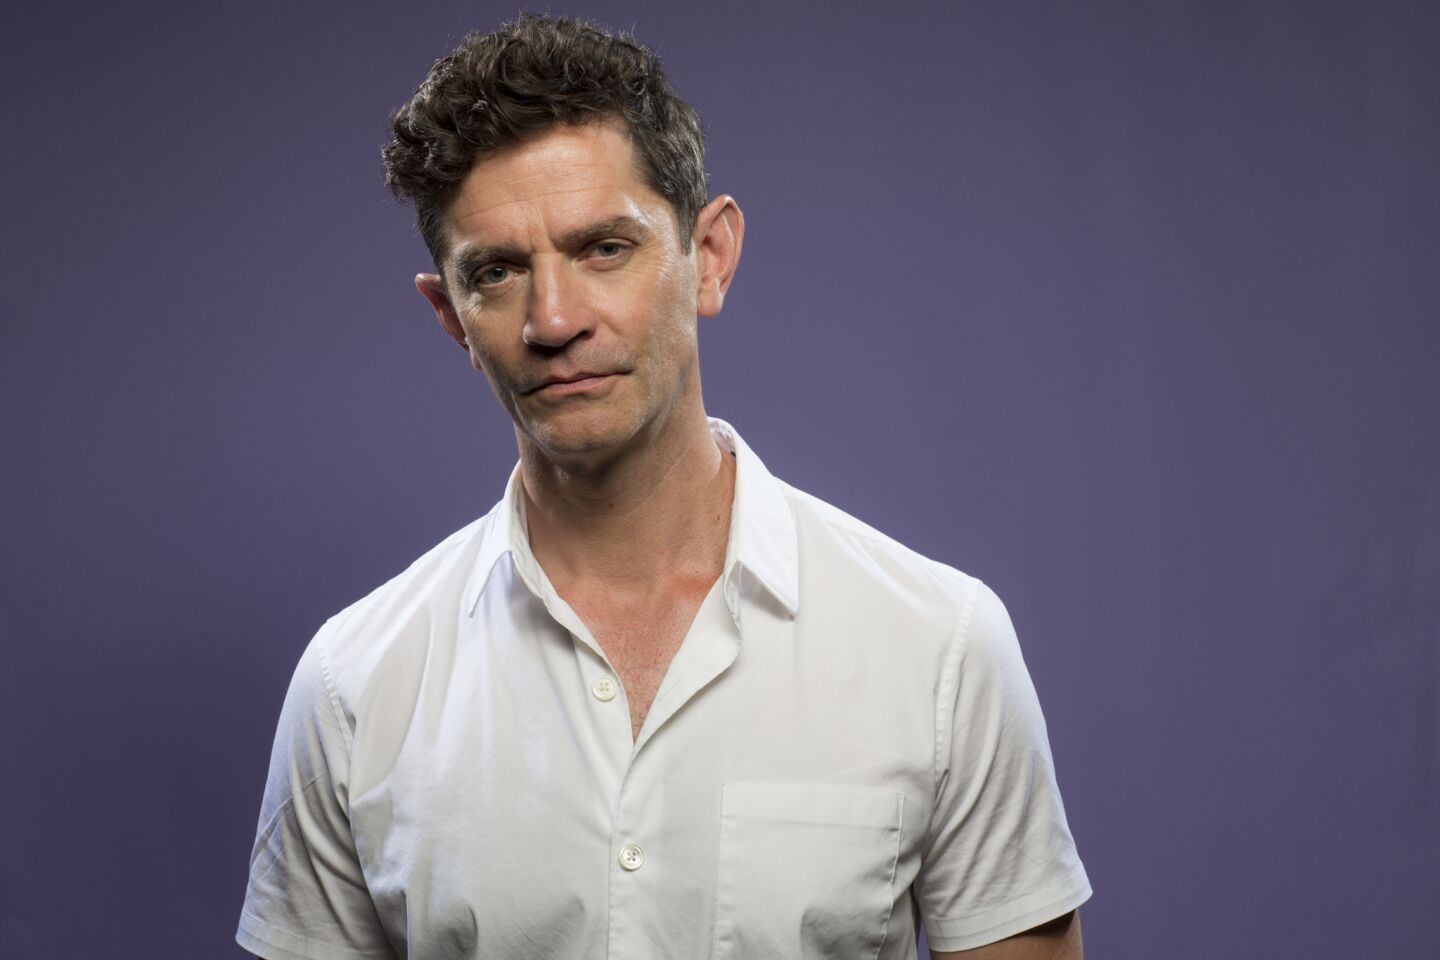 James Frain, from the television series "Star Trek Discovery," photographed in the L.A. Times photo studio at Comic-Con 2017.